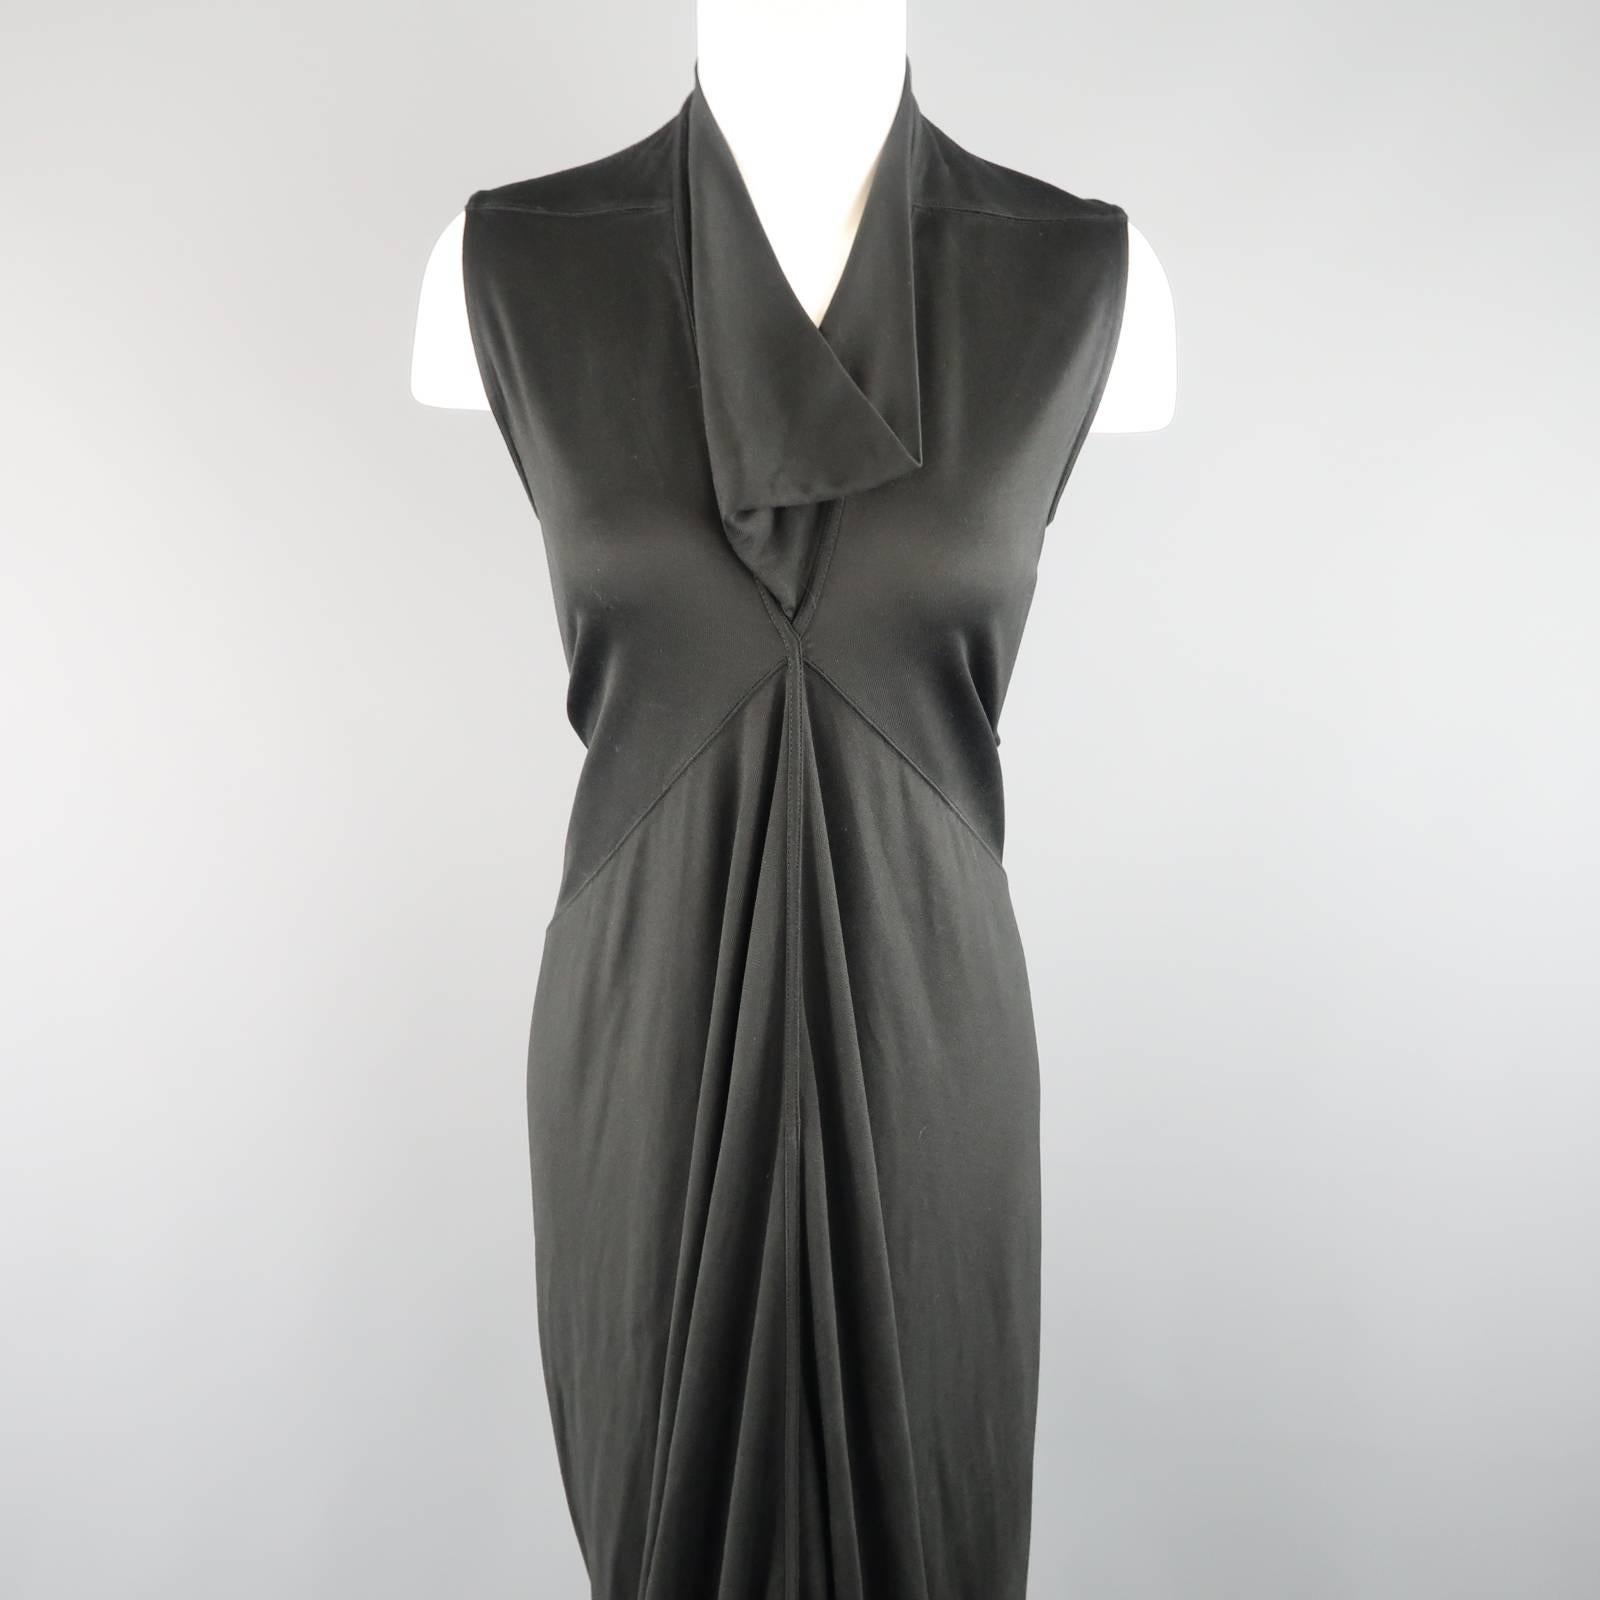 This fabulous RICK OWENS gown comes in a silk jersey knit and features a draped collar, gathered center, and long mermaid train. Made in Italy.
 
New with Tags. Retails: $2,905.00.
Marked: US 8
 
Measurements:
 
Shoulder: 13.5 in.
Bust: 38